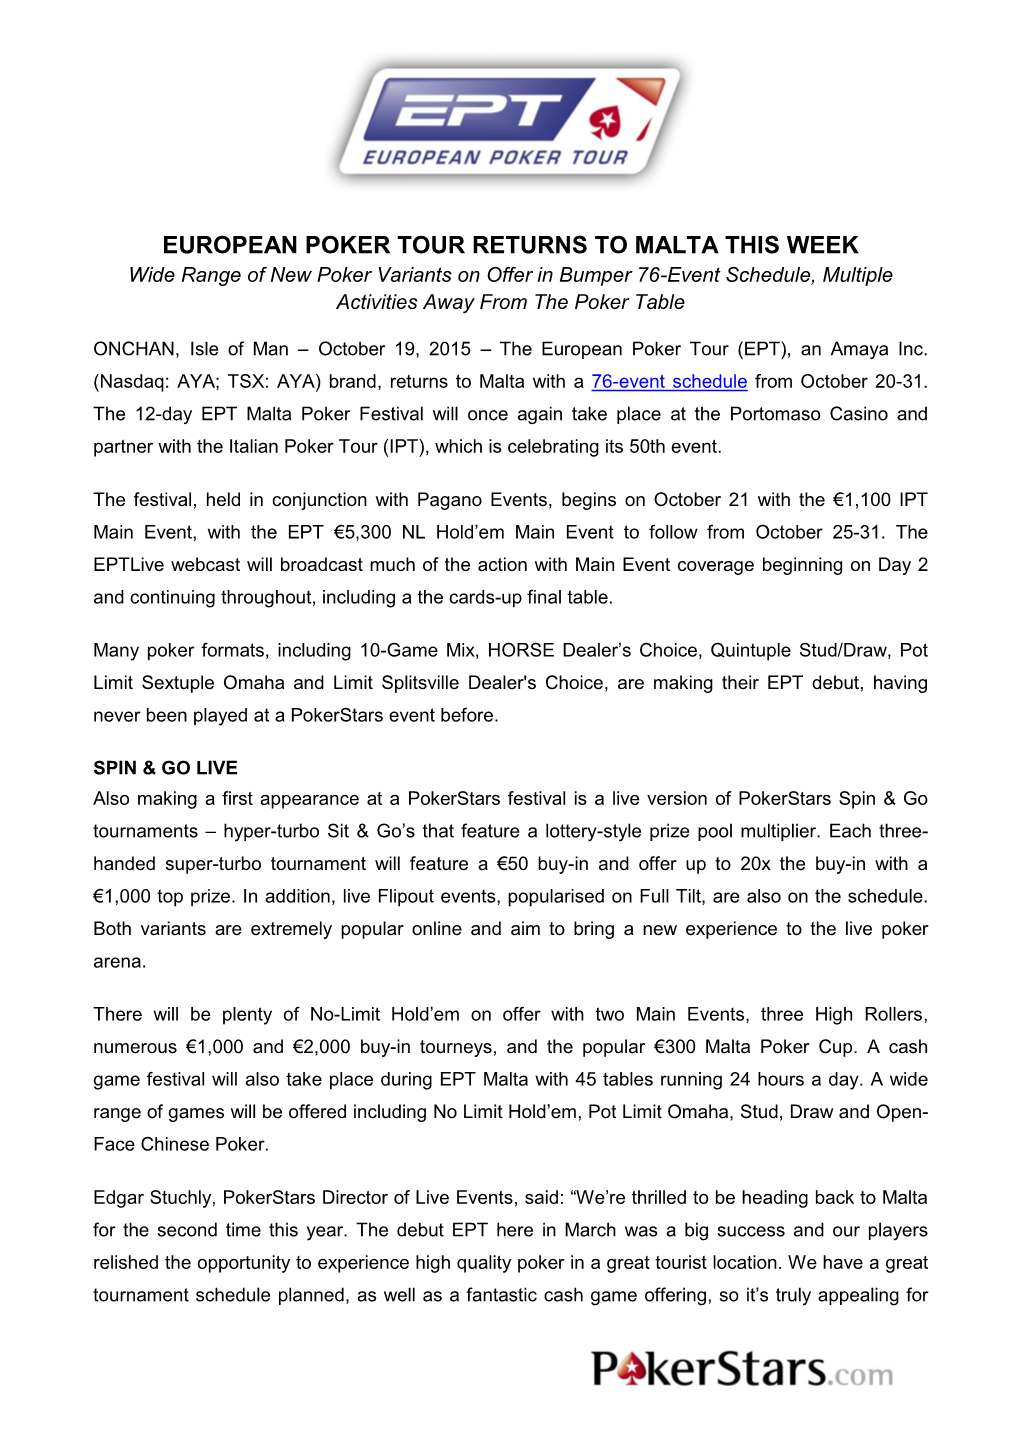 EUROPEAN POKER TOUR RETURNS to MALTA THIS WEEK Wide Range of New Poker Variants on Offer in Bumper 76-Event Schedule, Multiple Activities Away from the Poker Table